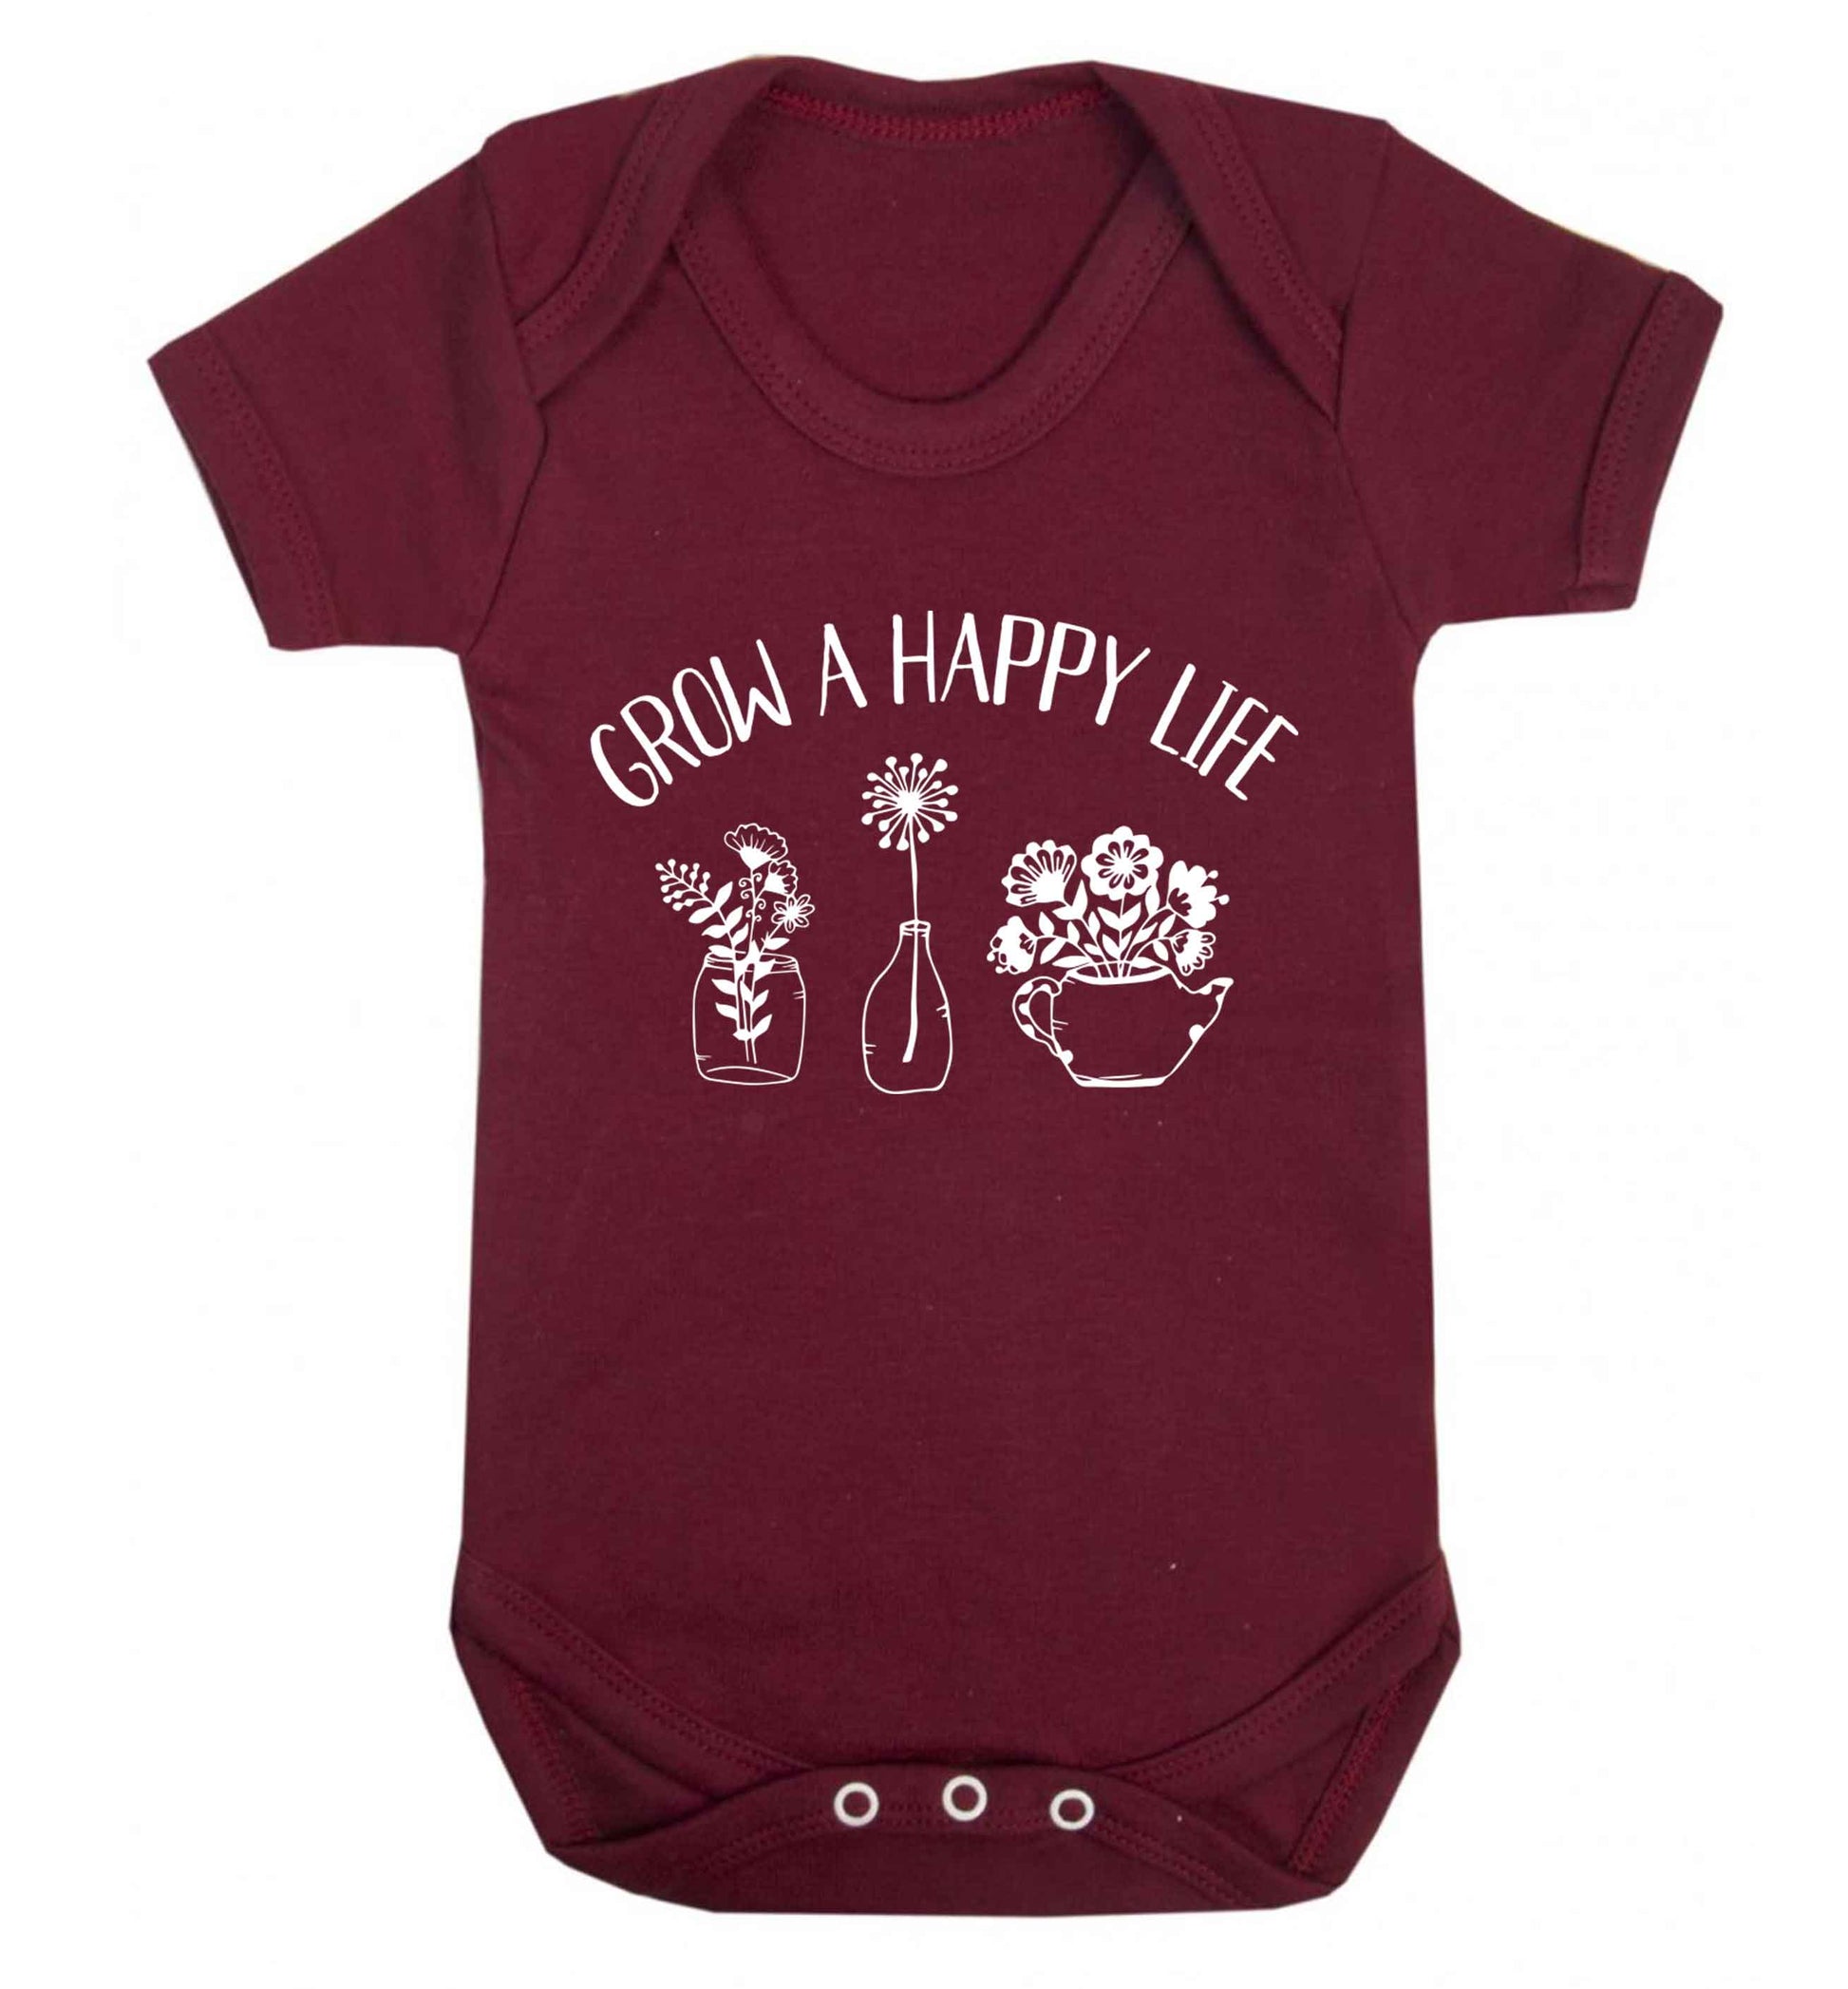 Grow a happy life Baby Vest maroon 18-24 months